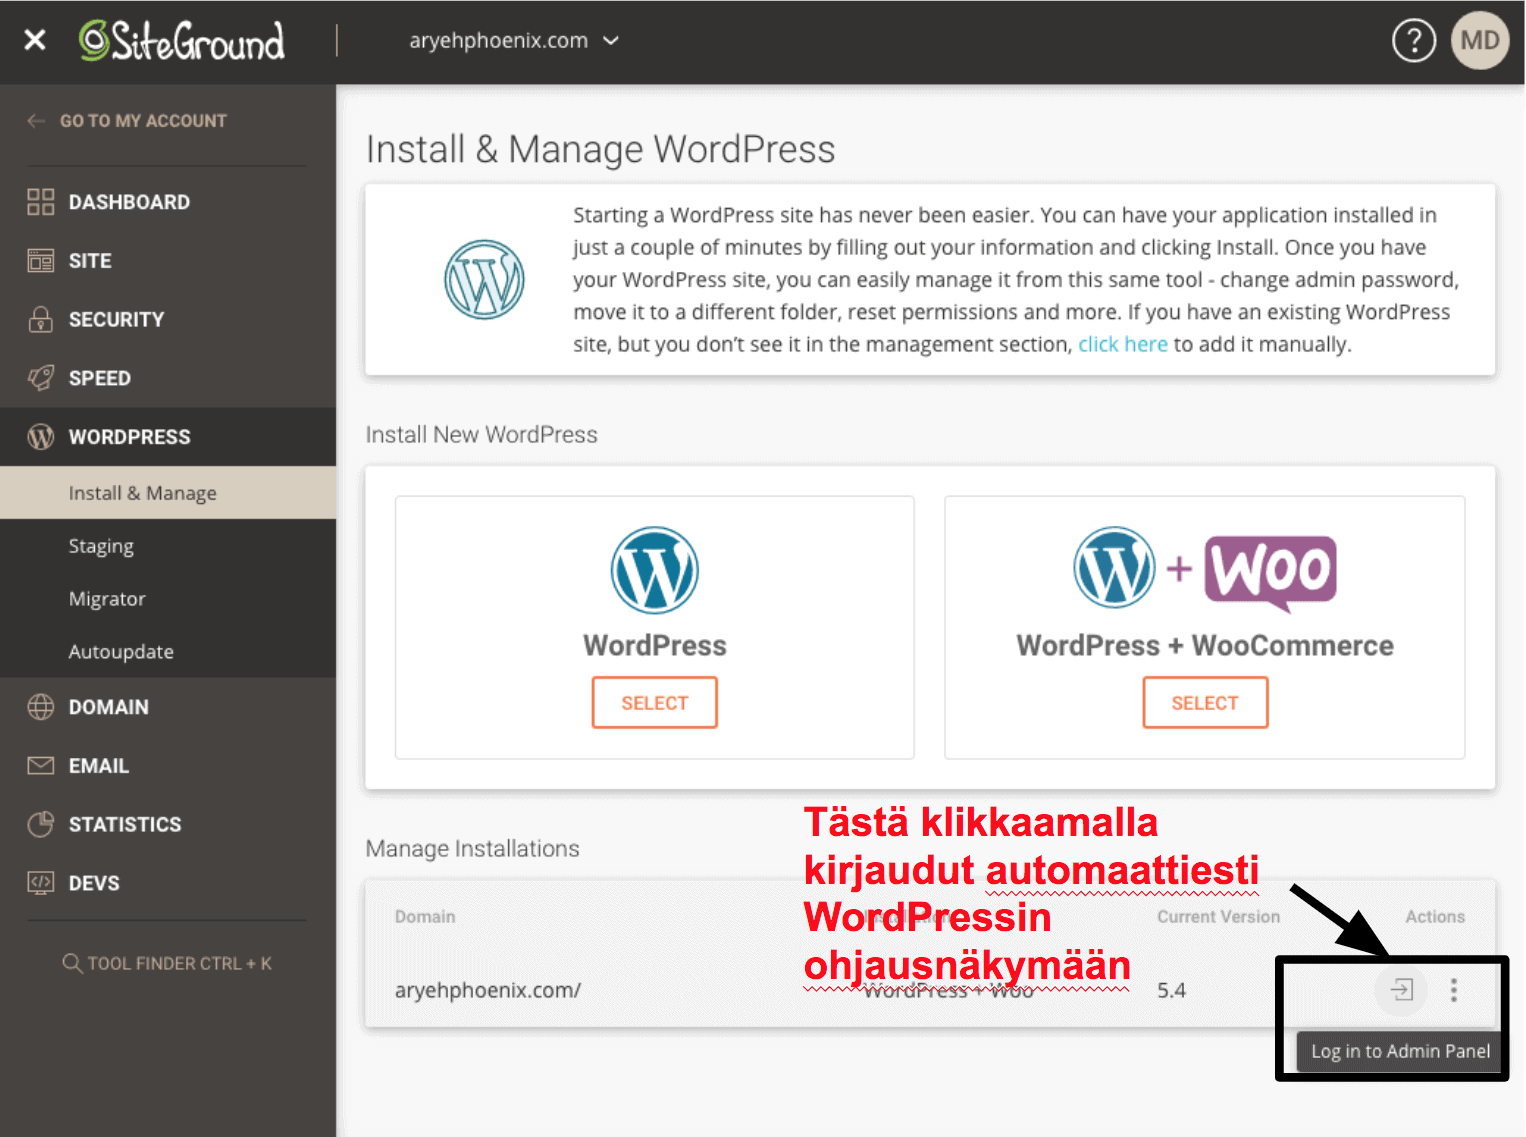 SiteGround offers a one click login option for your WordPress dashboard FL15 1